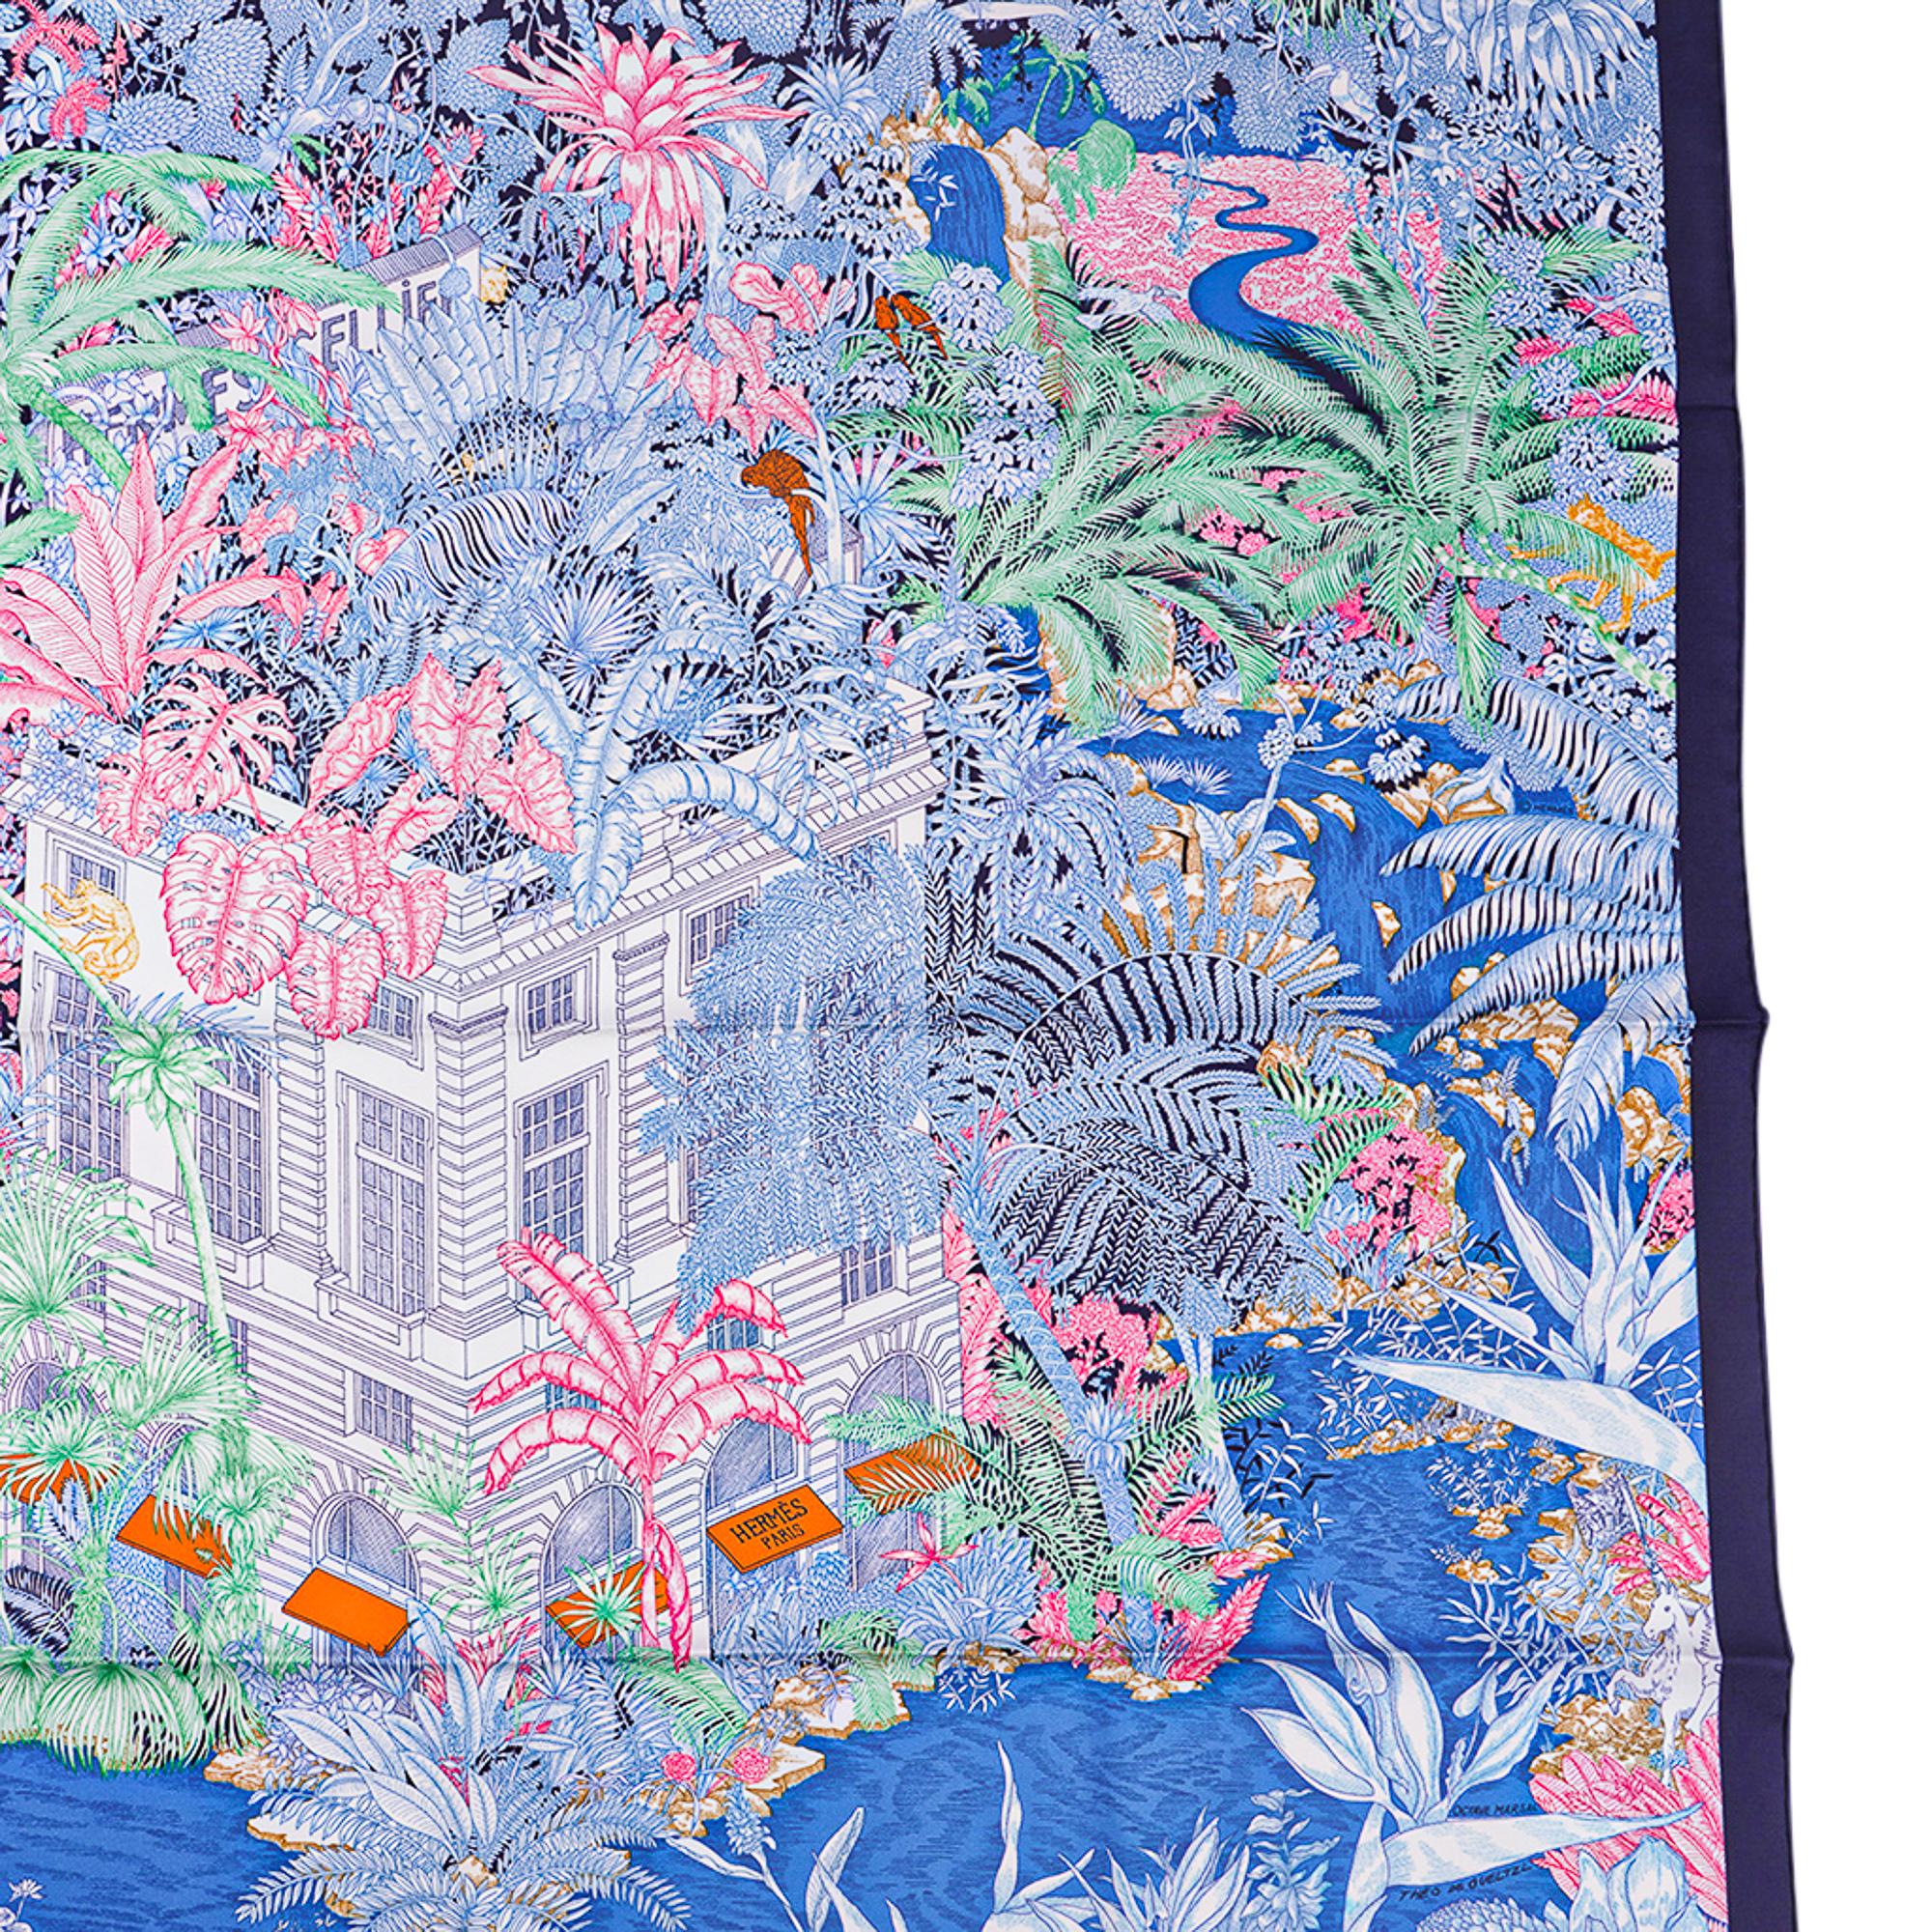 Mightychic offers a guaranteed authentic Hermes Faubourg Tropical scarf featured in Bleu Jean, Vert and Jaune.
Designed by Octave Marsal and Theo de Gueltzl.
This Hermes 90 silk scarf is set with a wonderful tropical jungle filled with marvelous